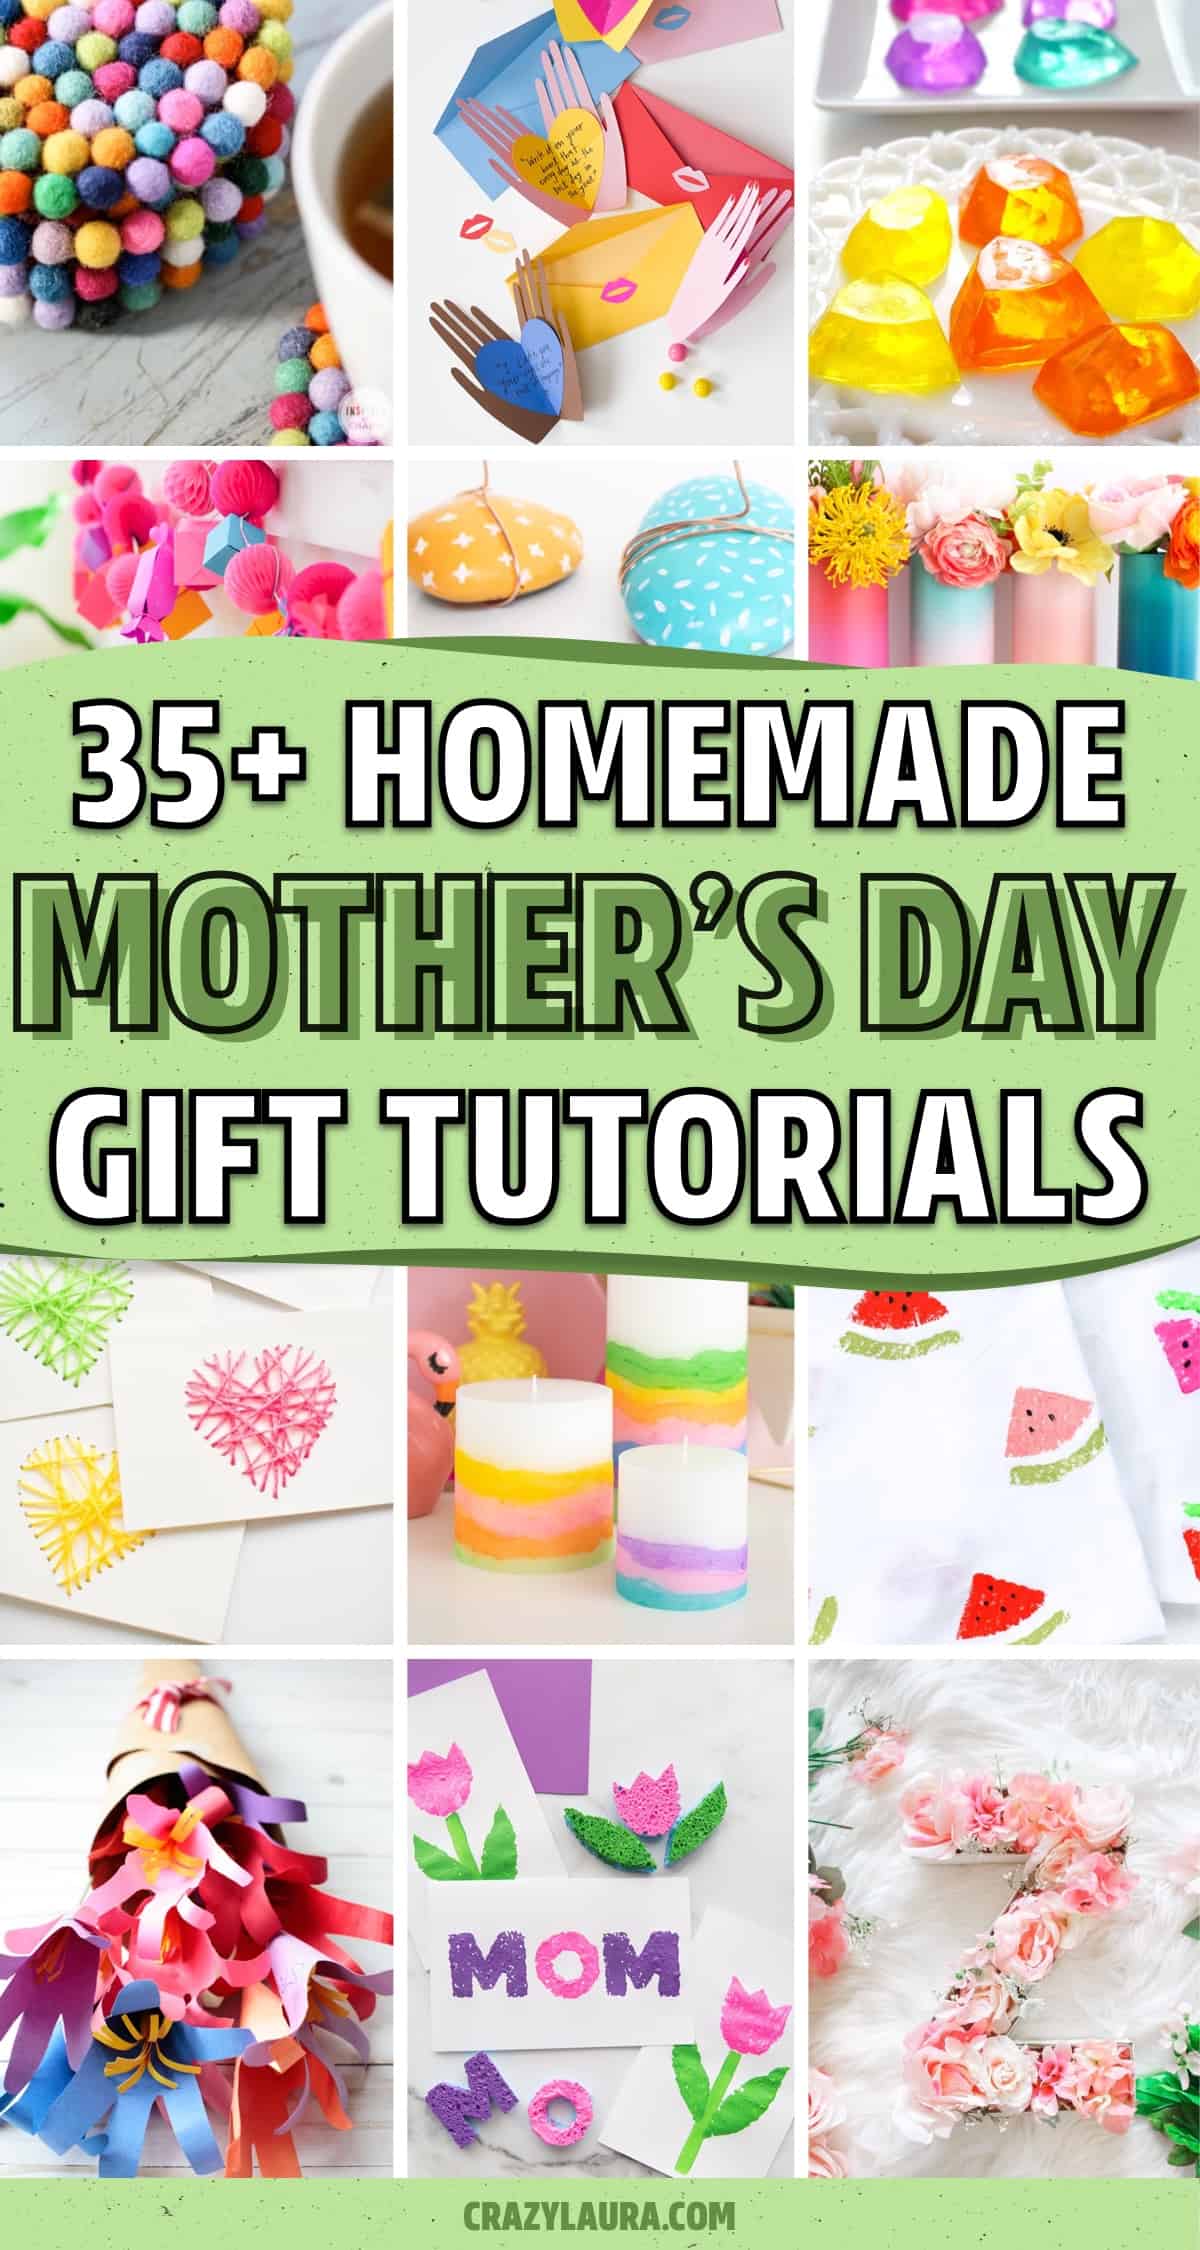 thoughtful crafts for mothers day gifts